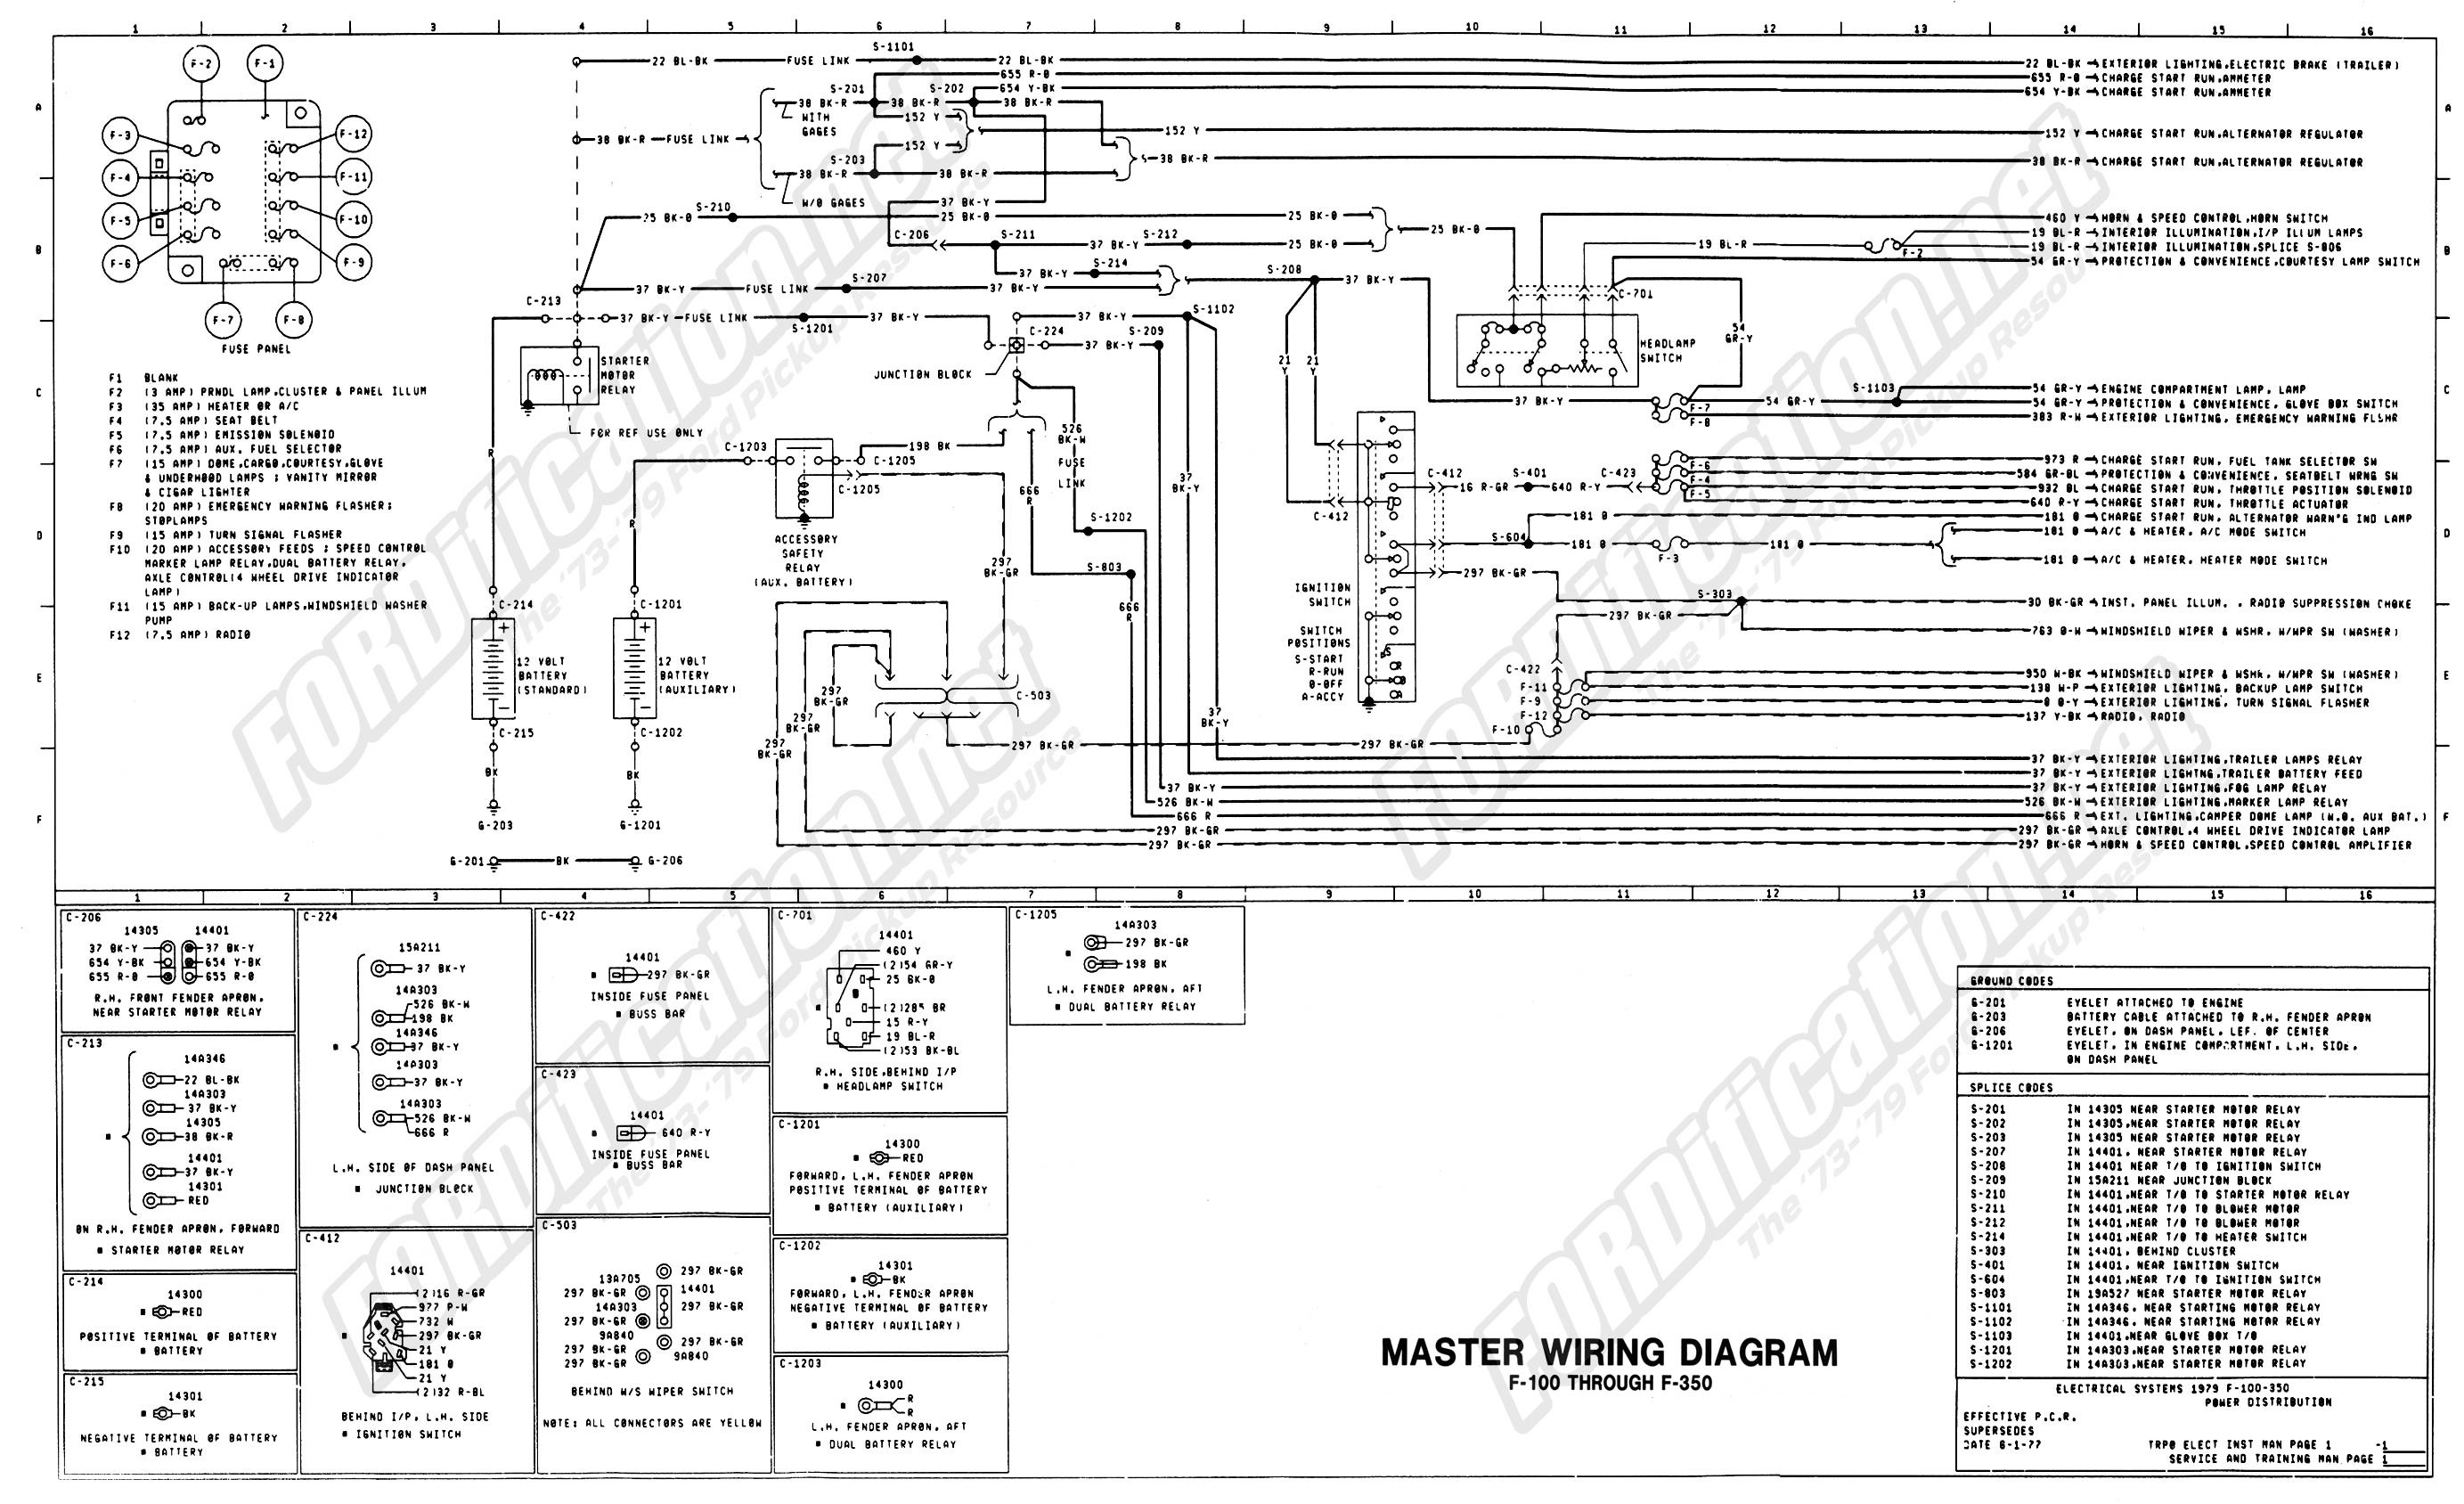 1973 1979 ford Truck Wiring Diagrams & Schematics fordification 1995 ford F150 Radio Wiring Diagram